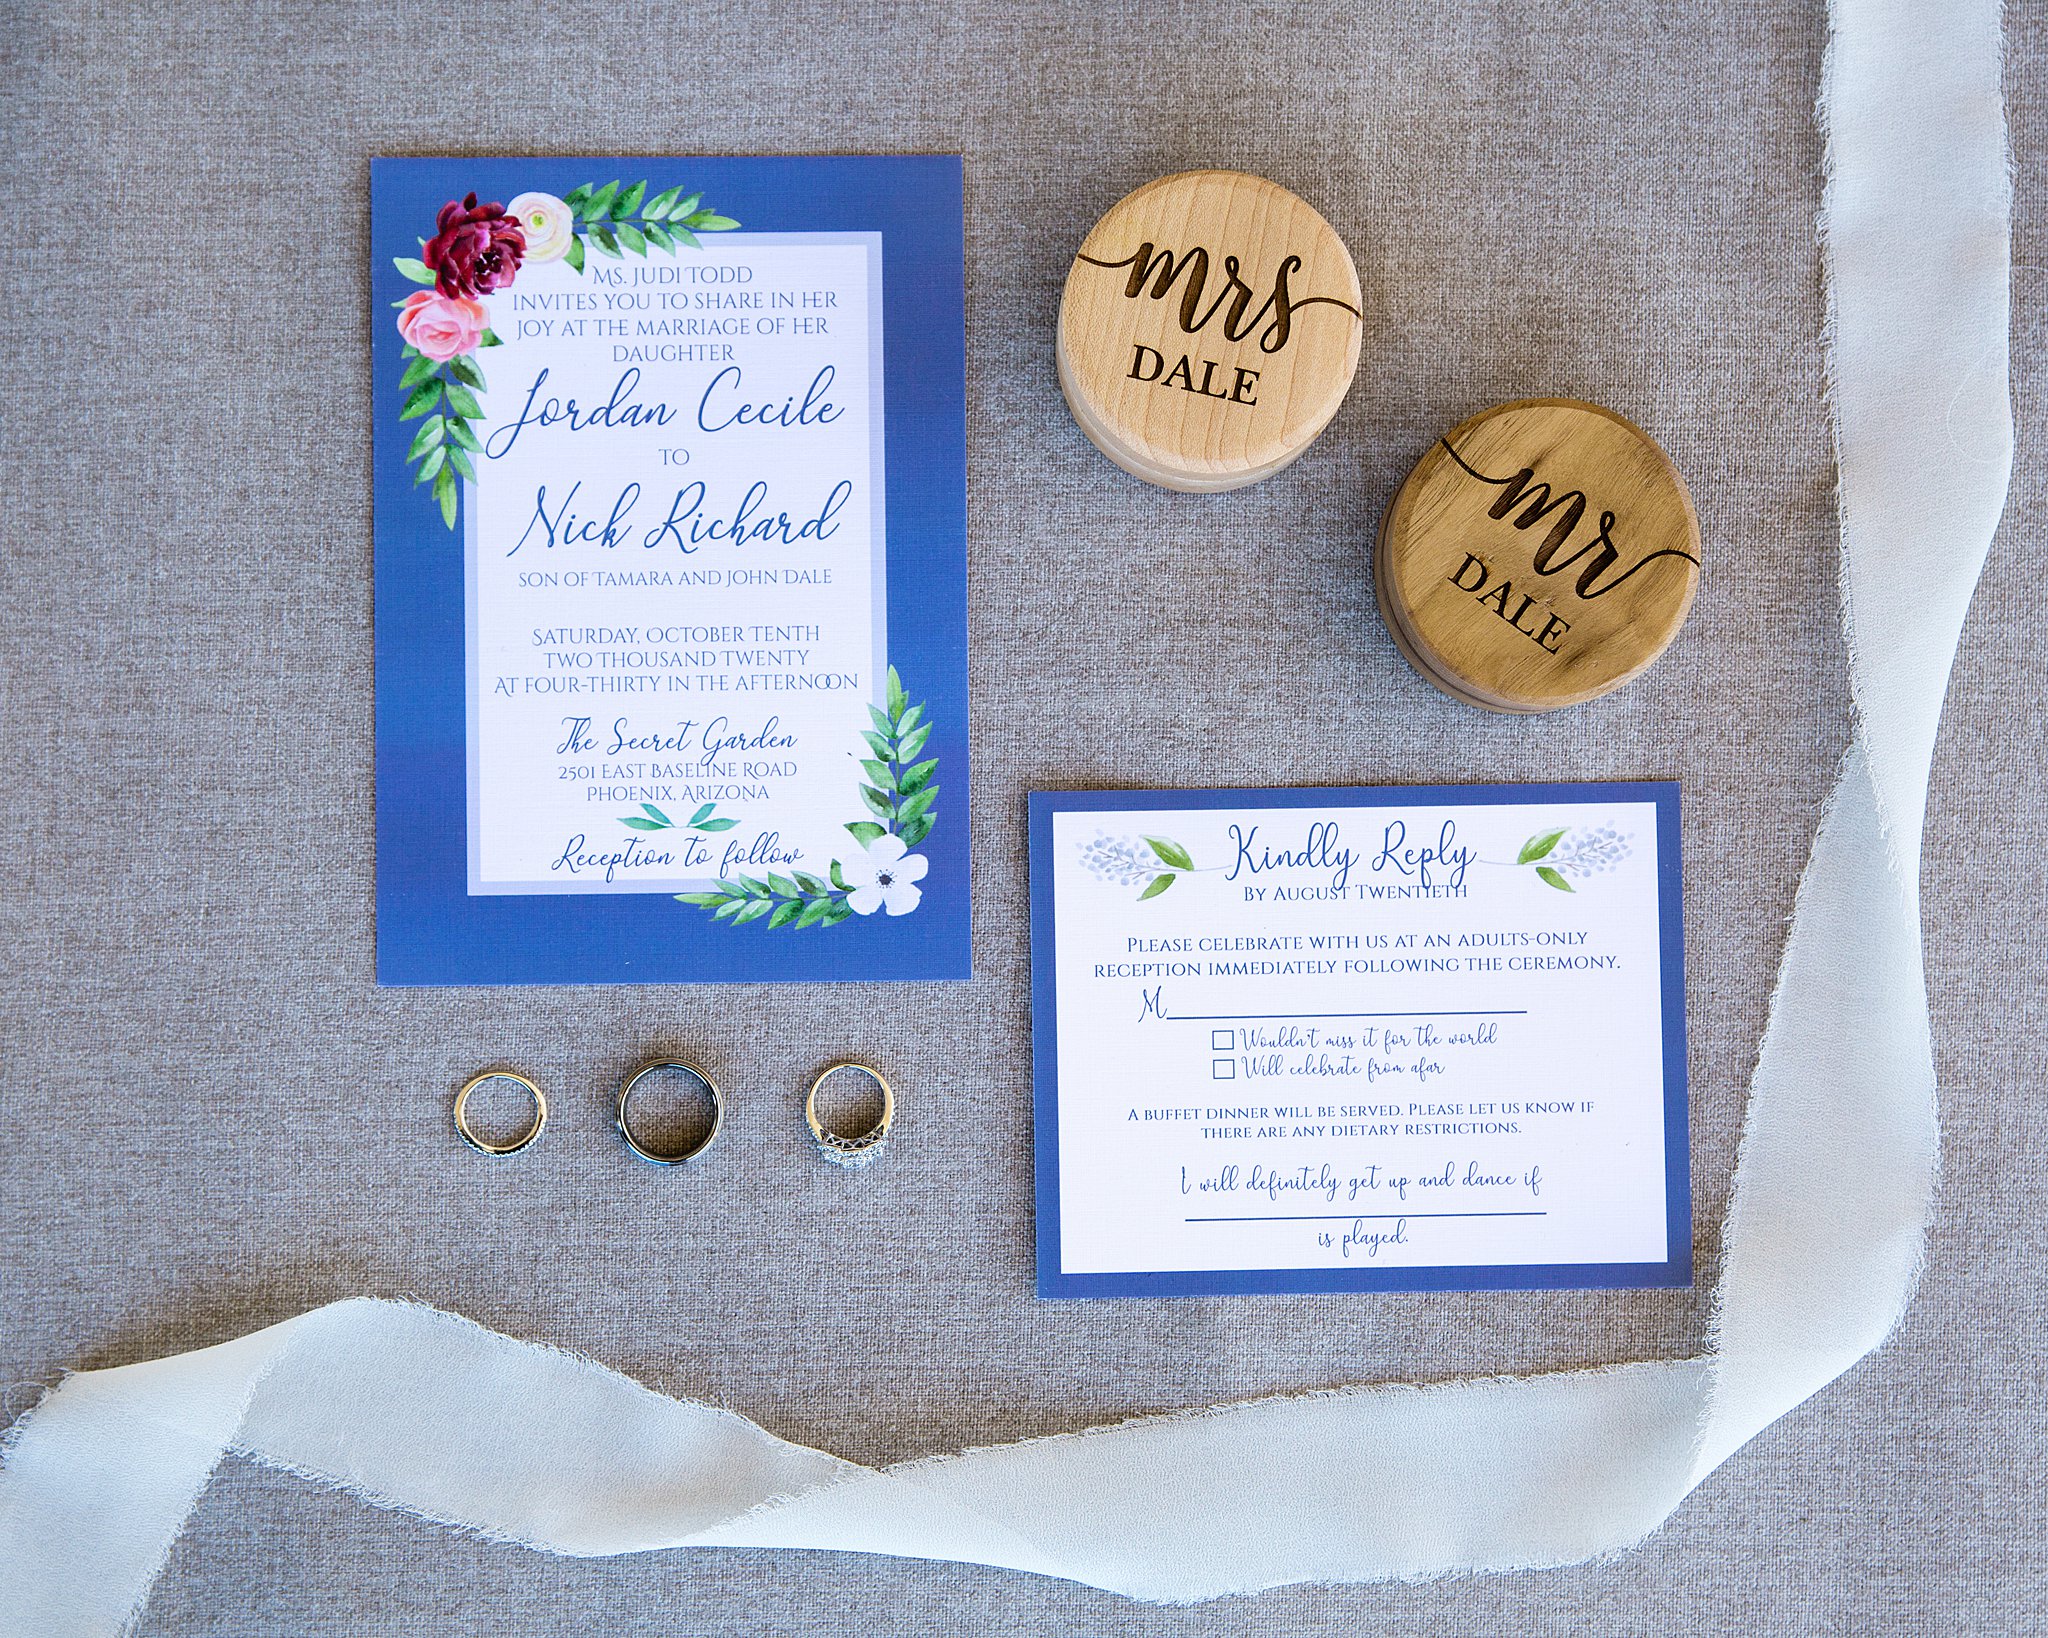 Garden wedding stationary and custom mr and mrs ring boxes by PMA Photography.